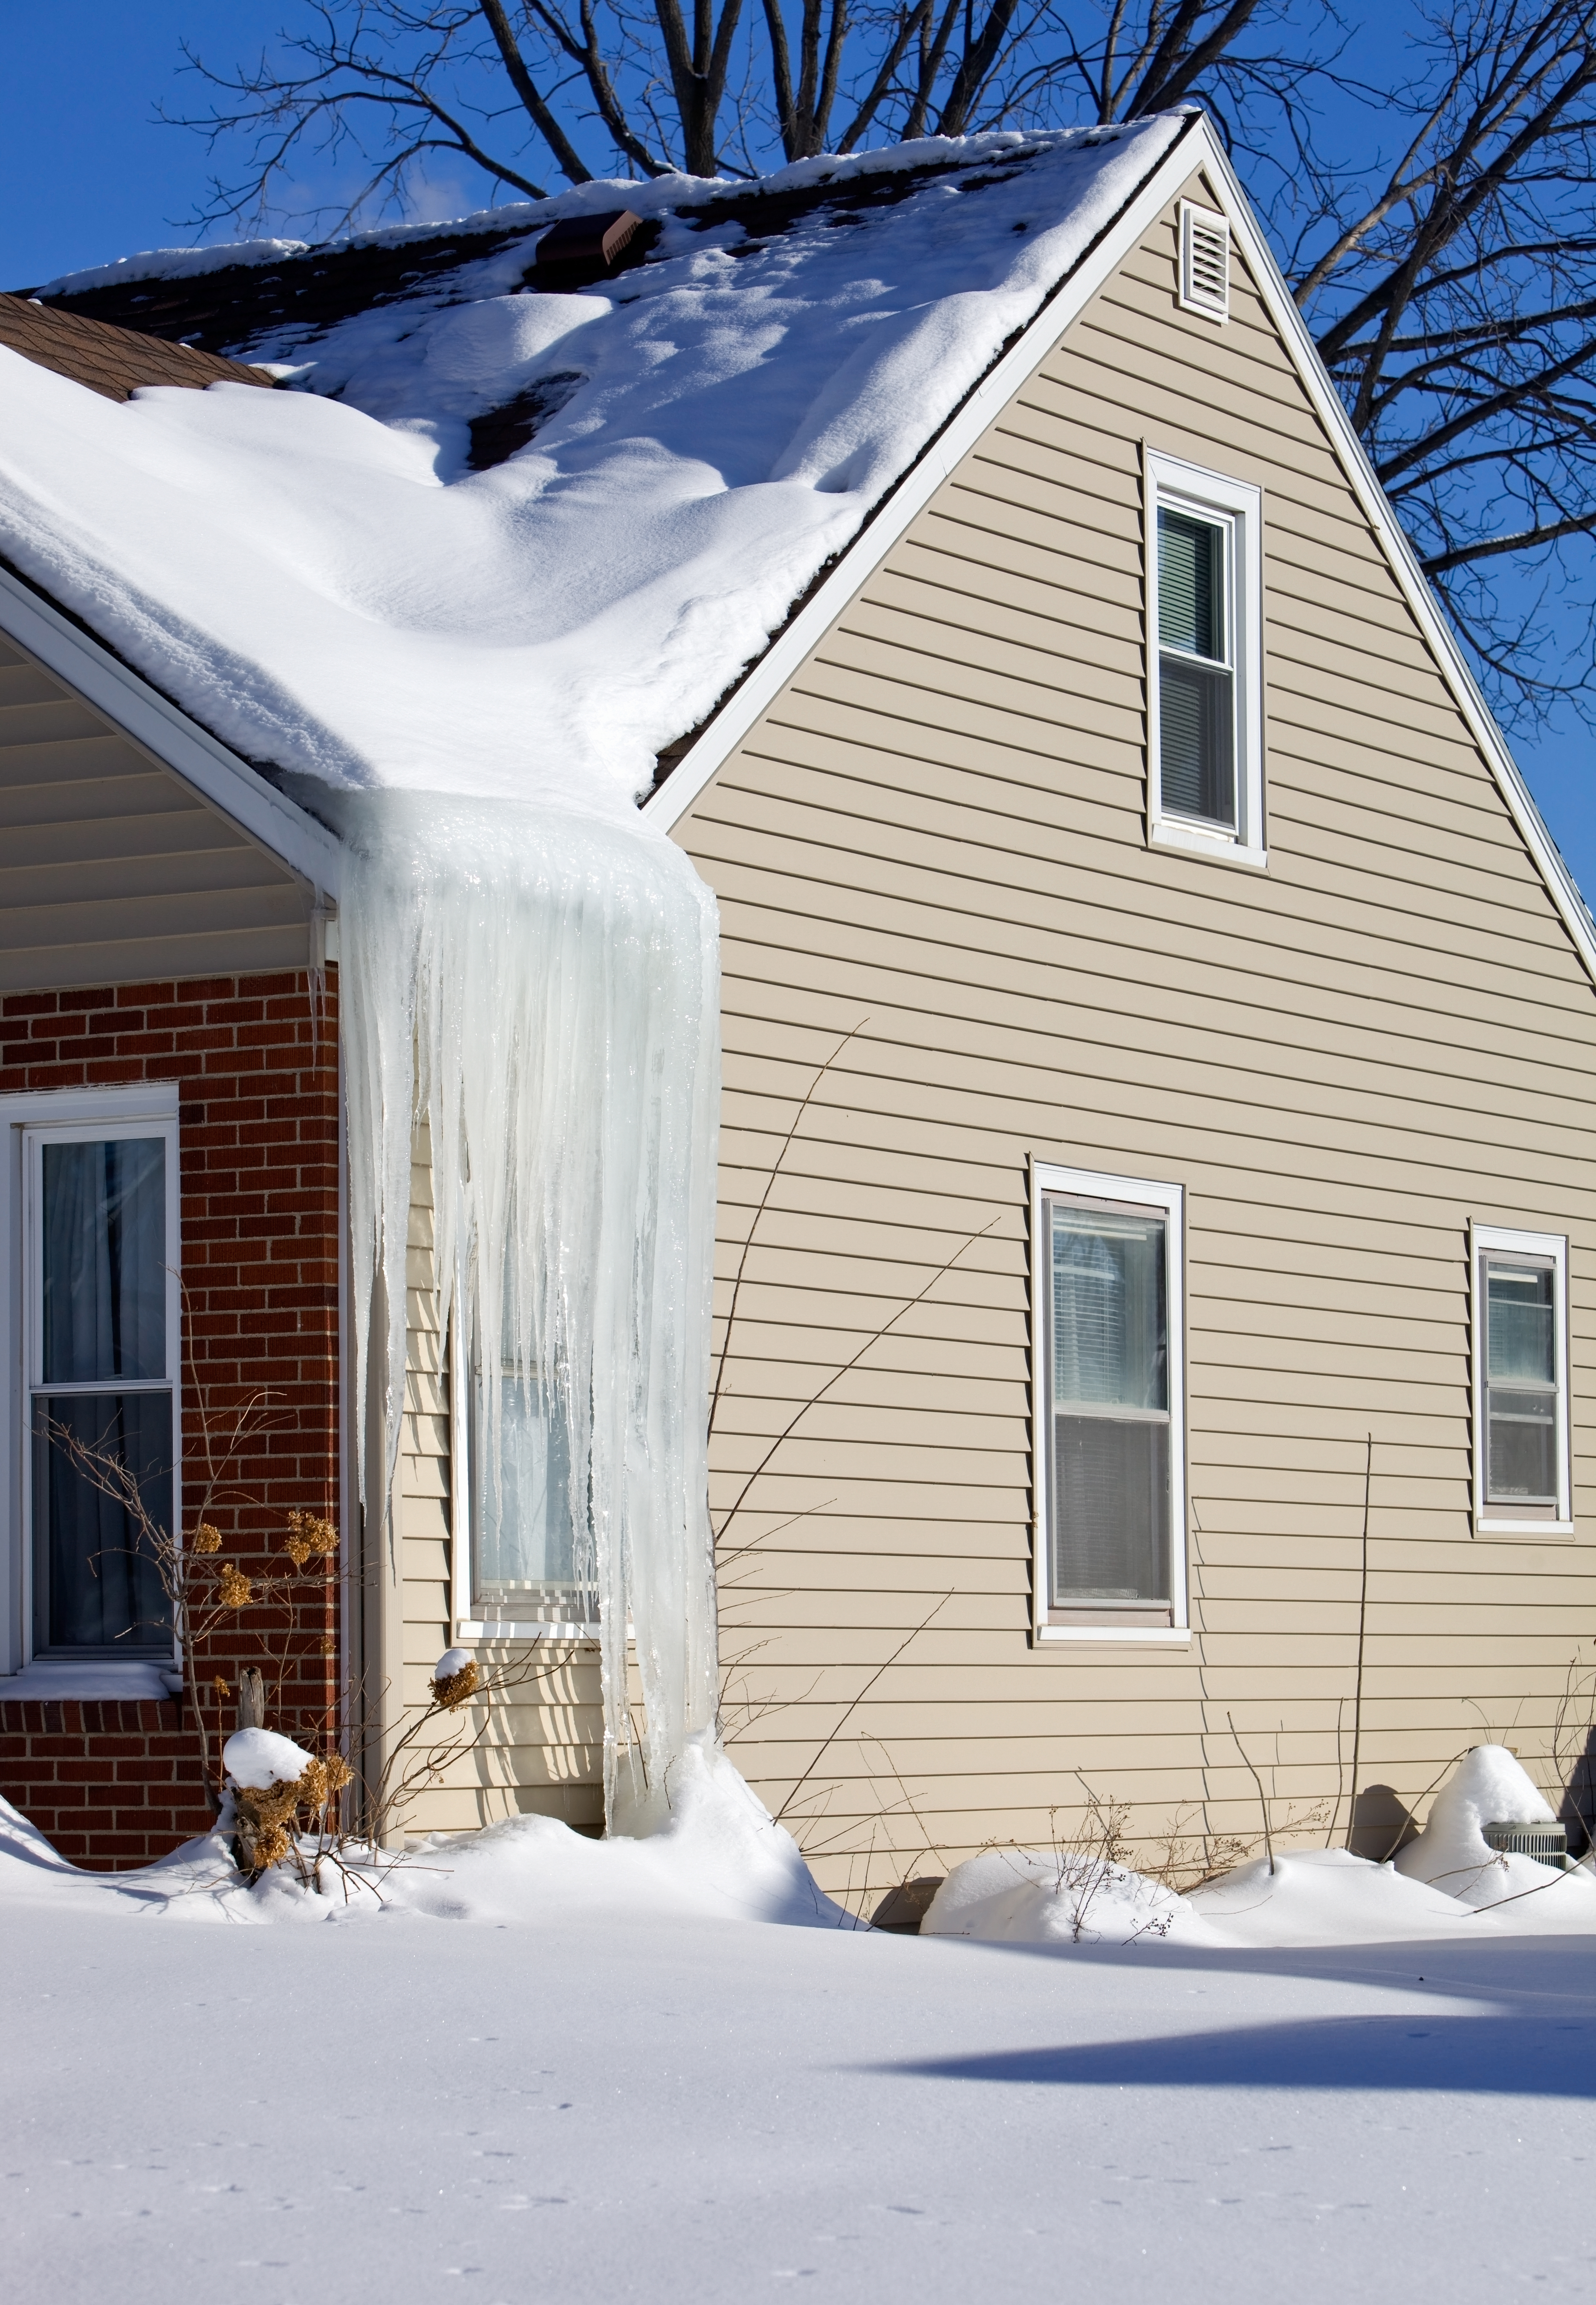 A house with large icicles hanging from the roof edge and snow-covered ground